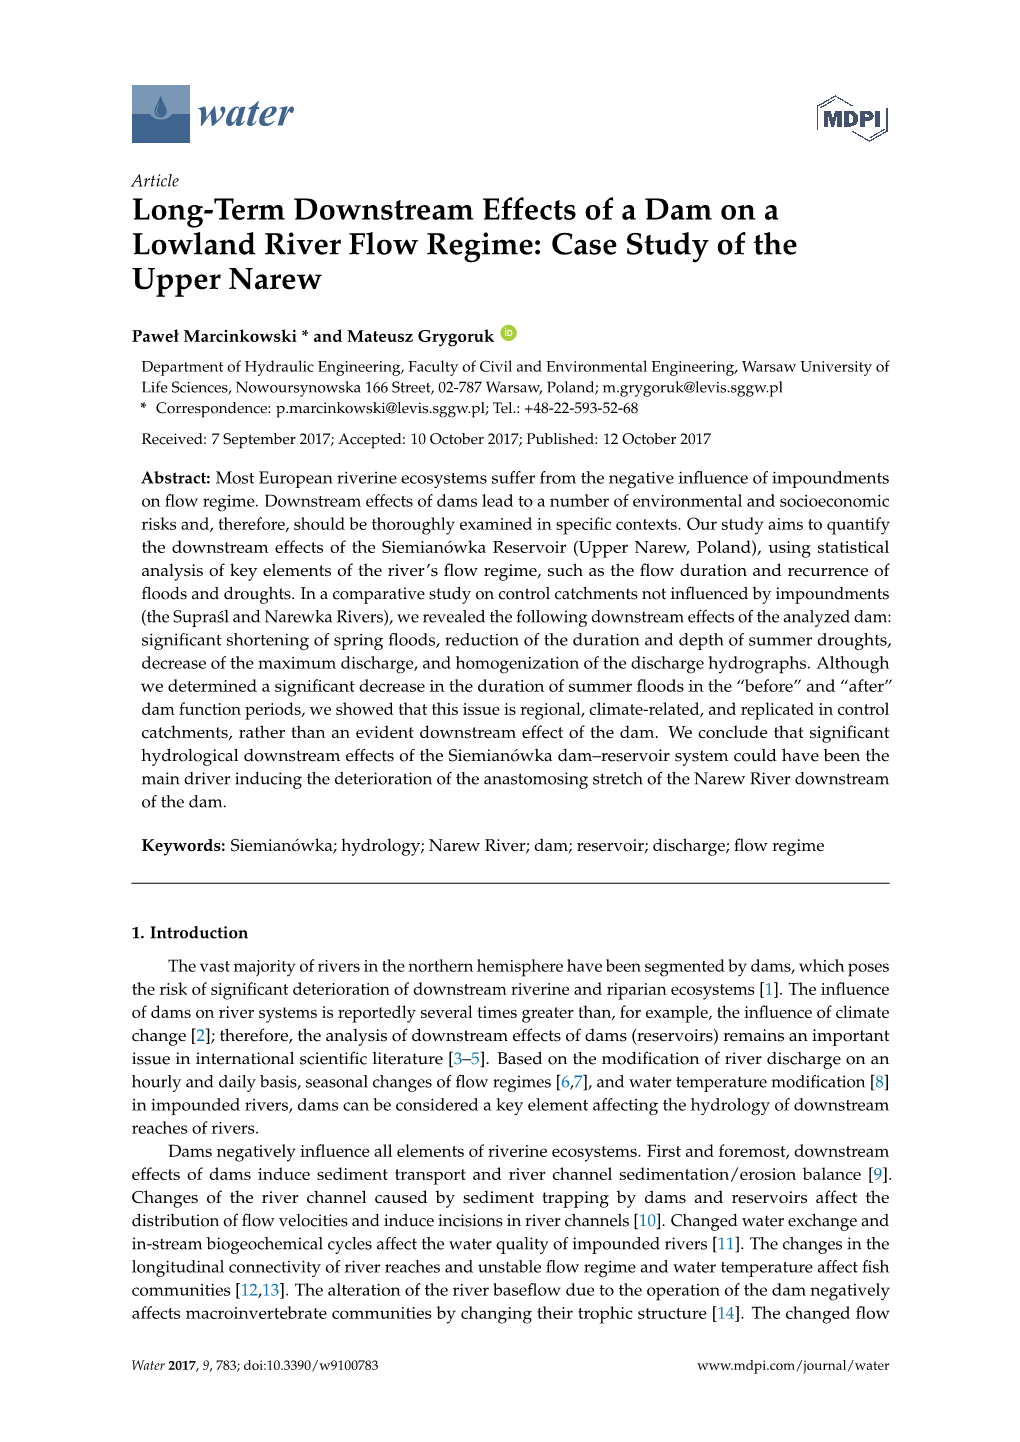 Long-Term Downstream Effects of a Dam on a Lowland River Flow Regime: Case Study of the Upper Narew